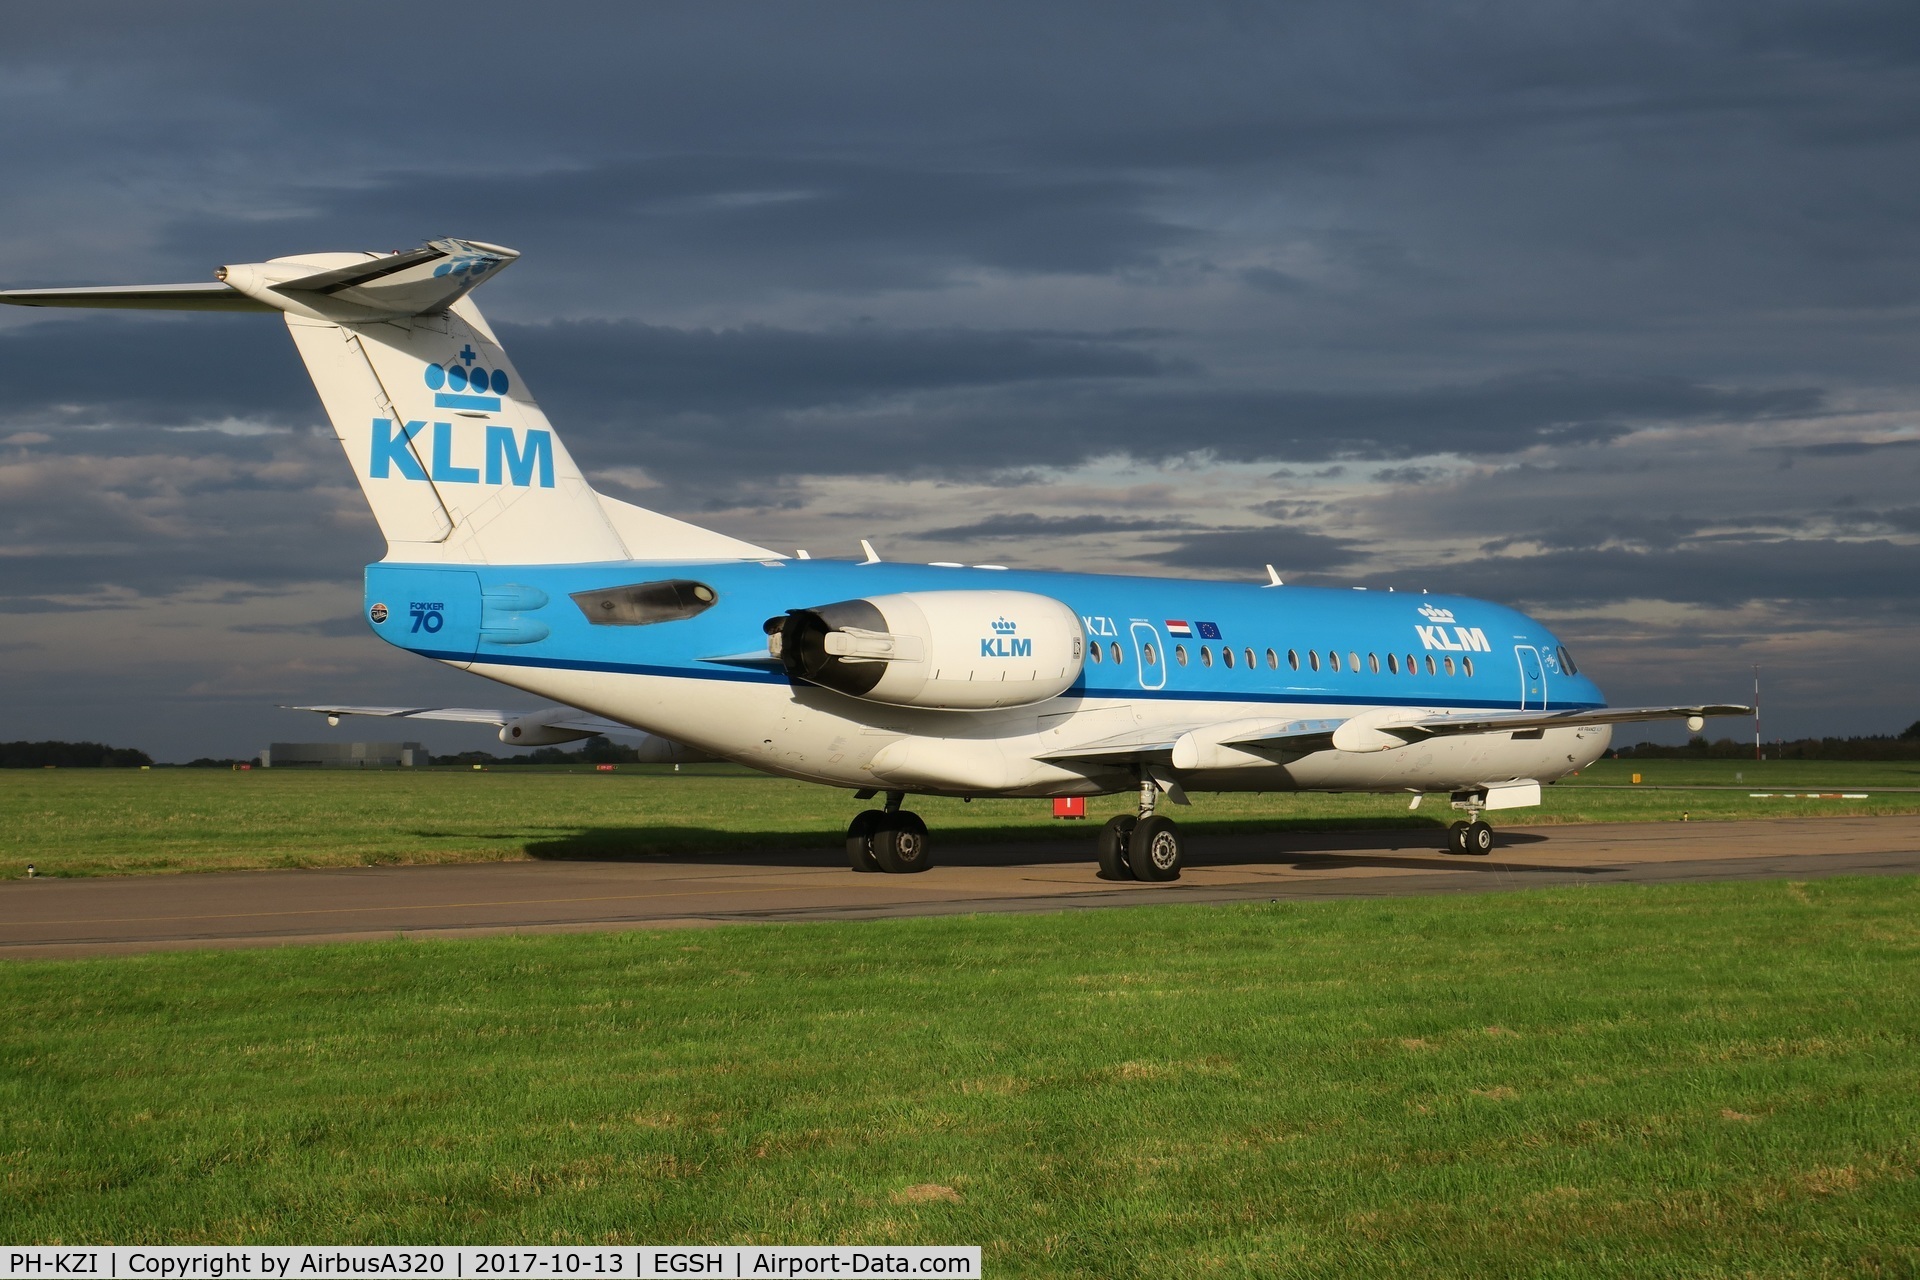 PH-KZI, 1997 Fokker 70 (F-28-0070) C/N 11579, Not long left for the 70s with KLM
ZI arriving on a semi sunny day